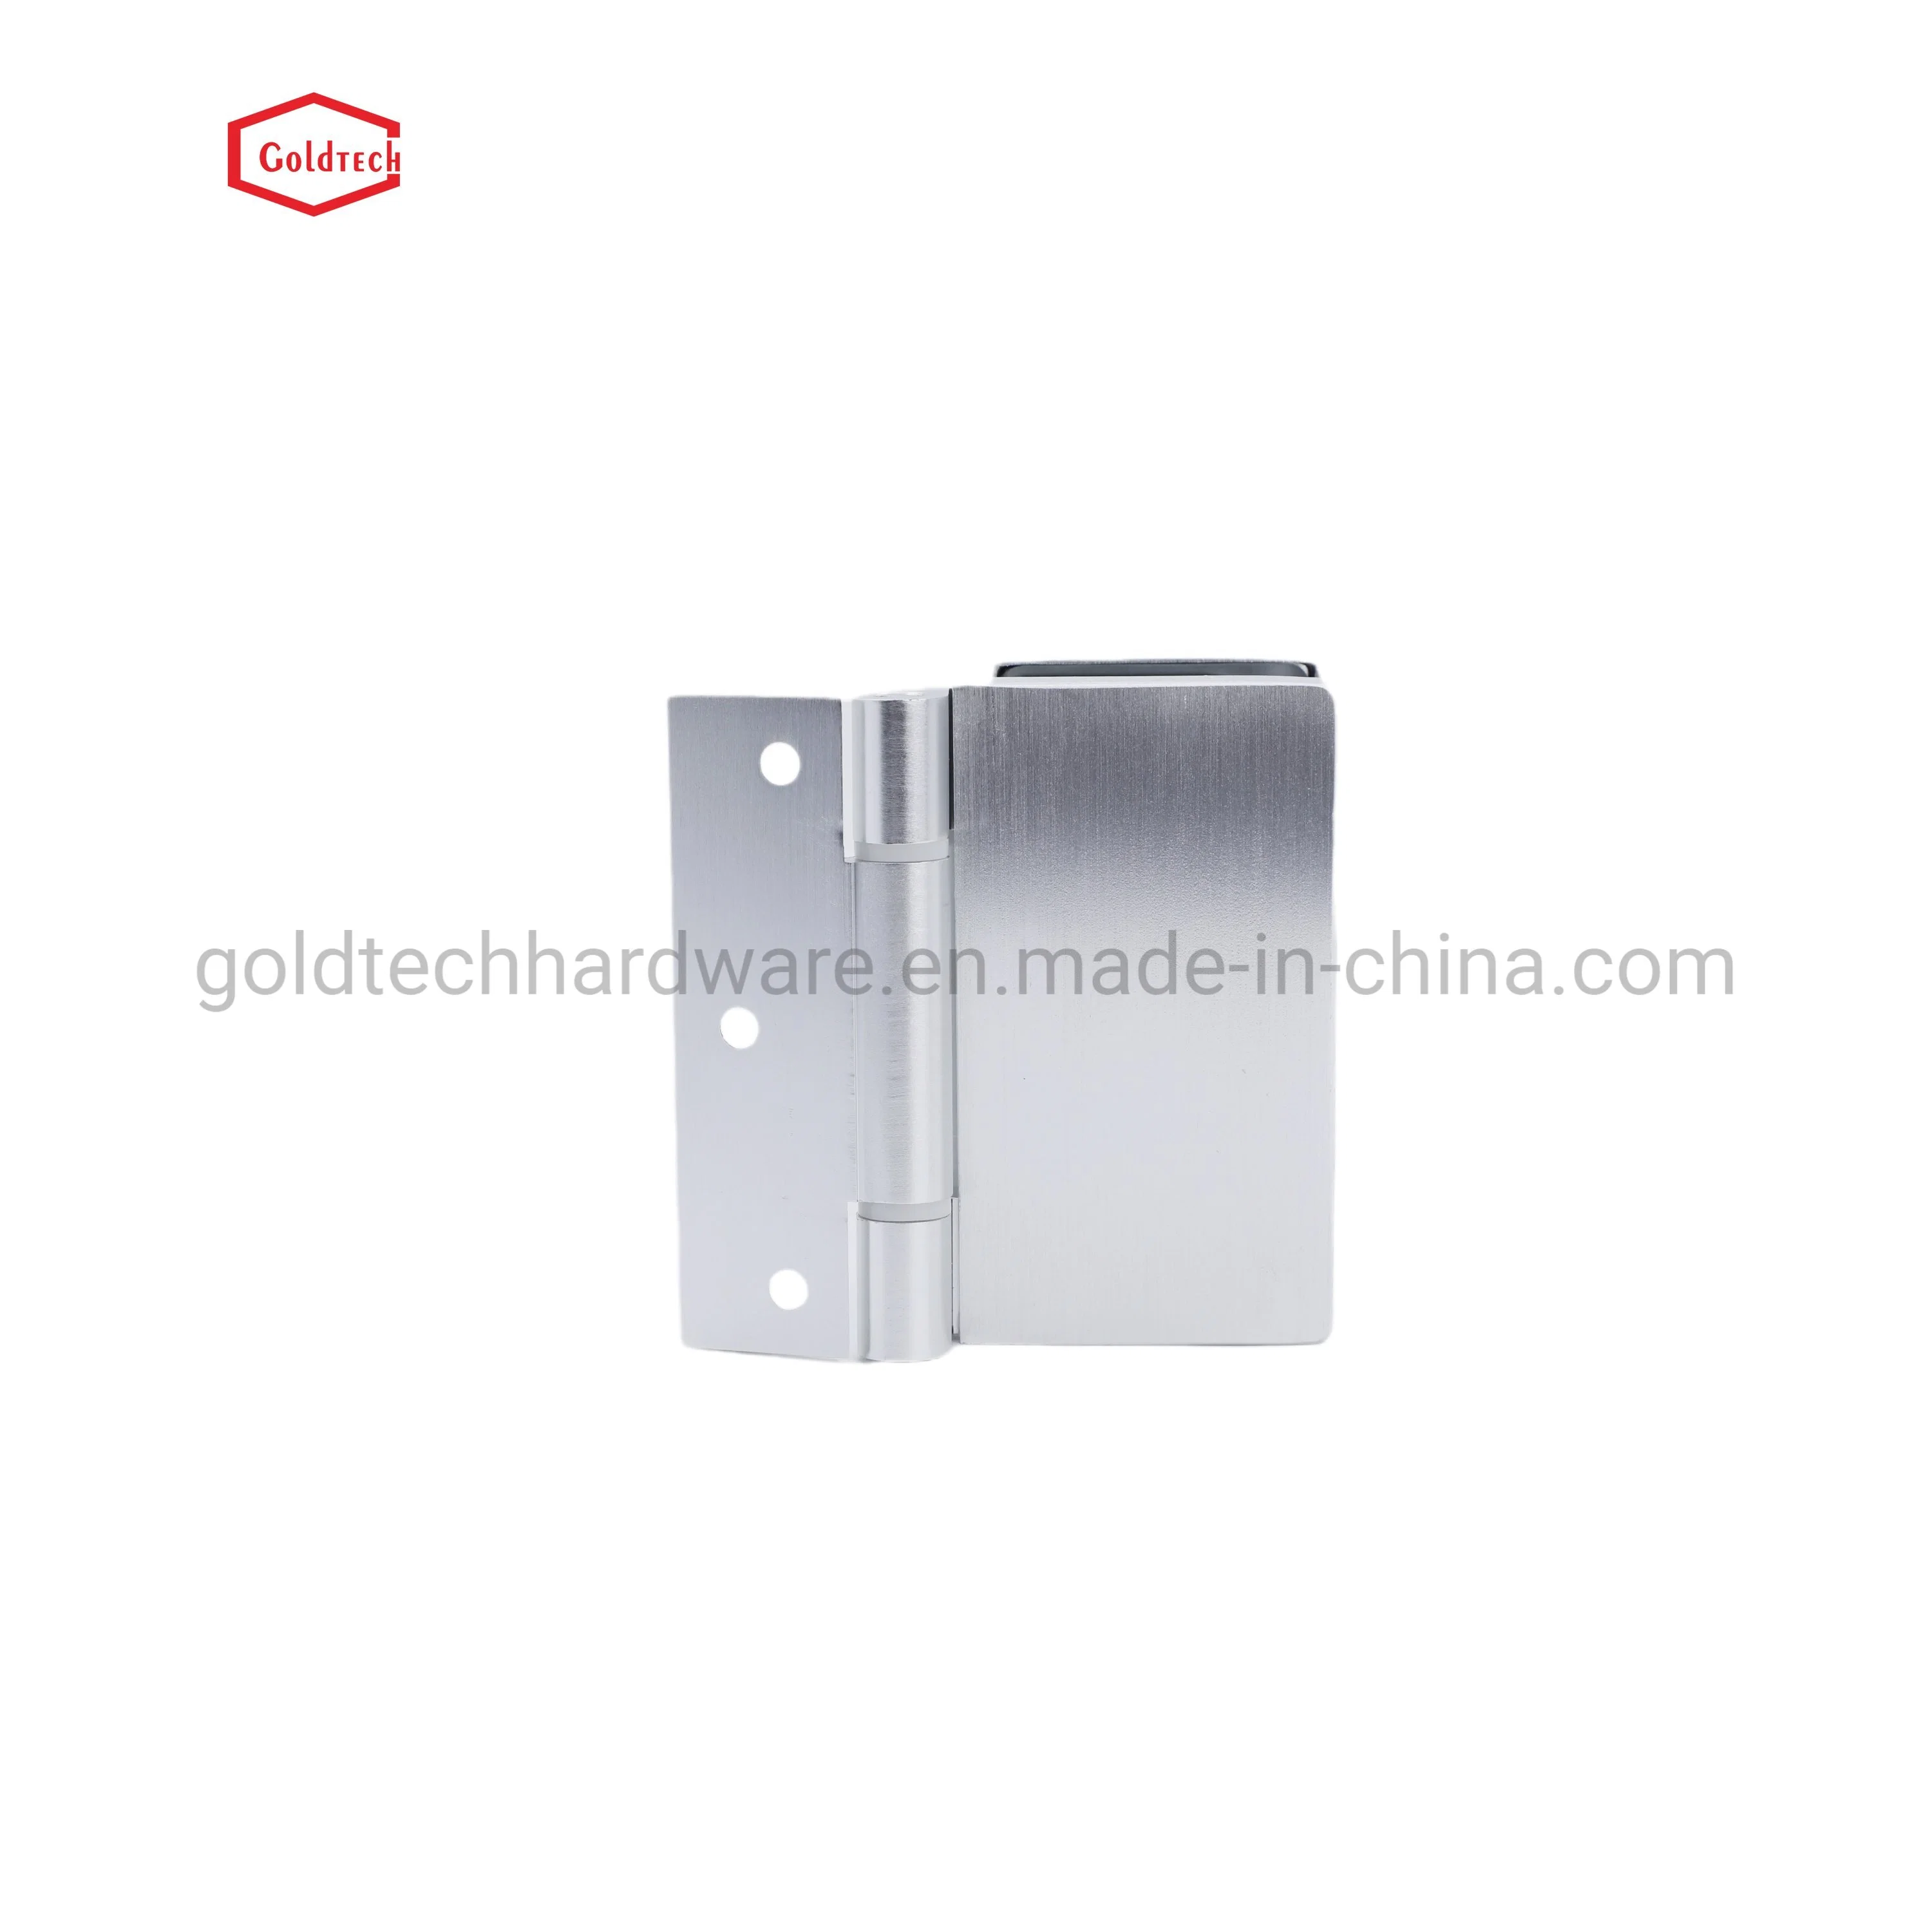 Furniture Hardware High quality/High cost performance Office Door Hinges